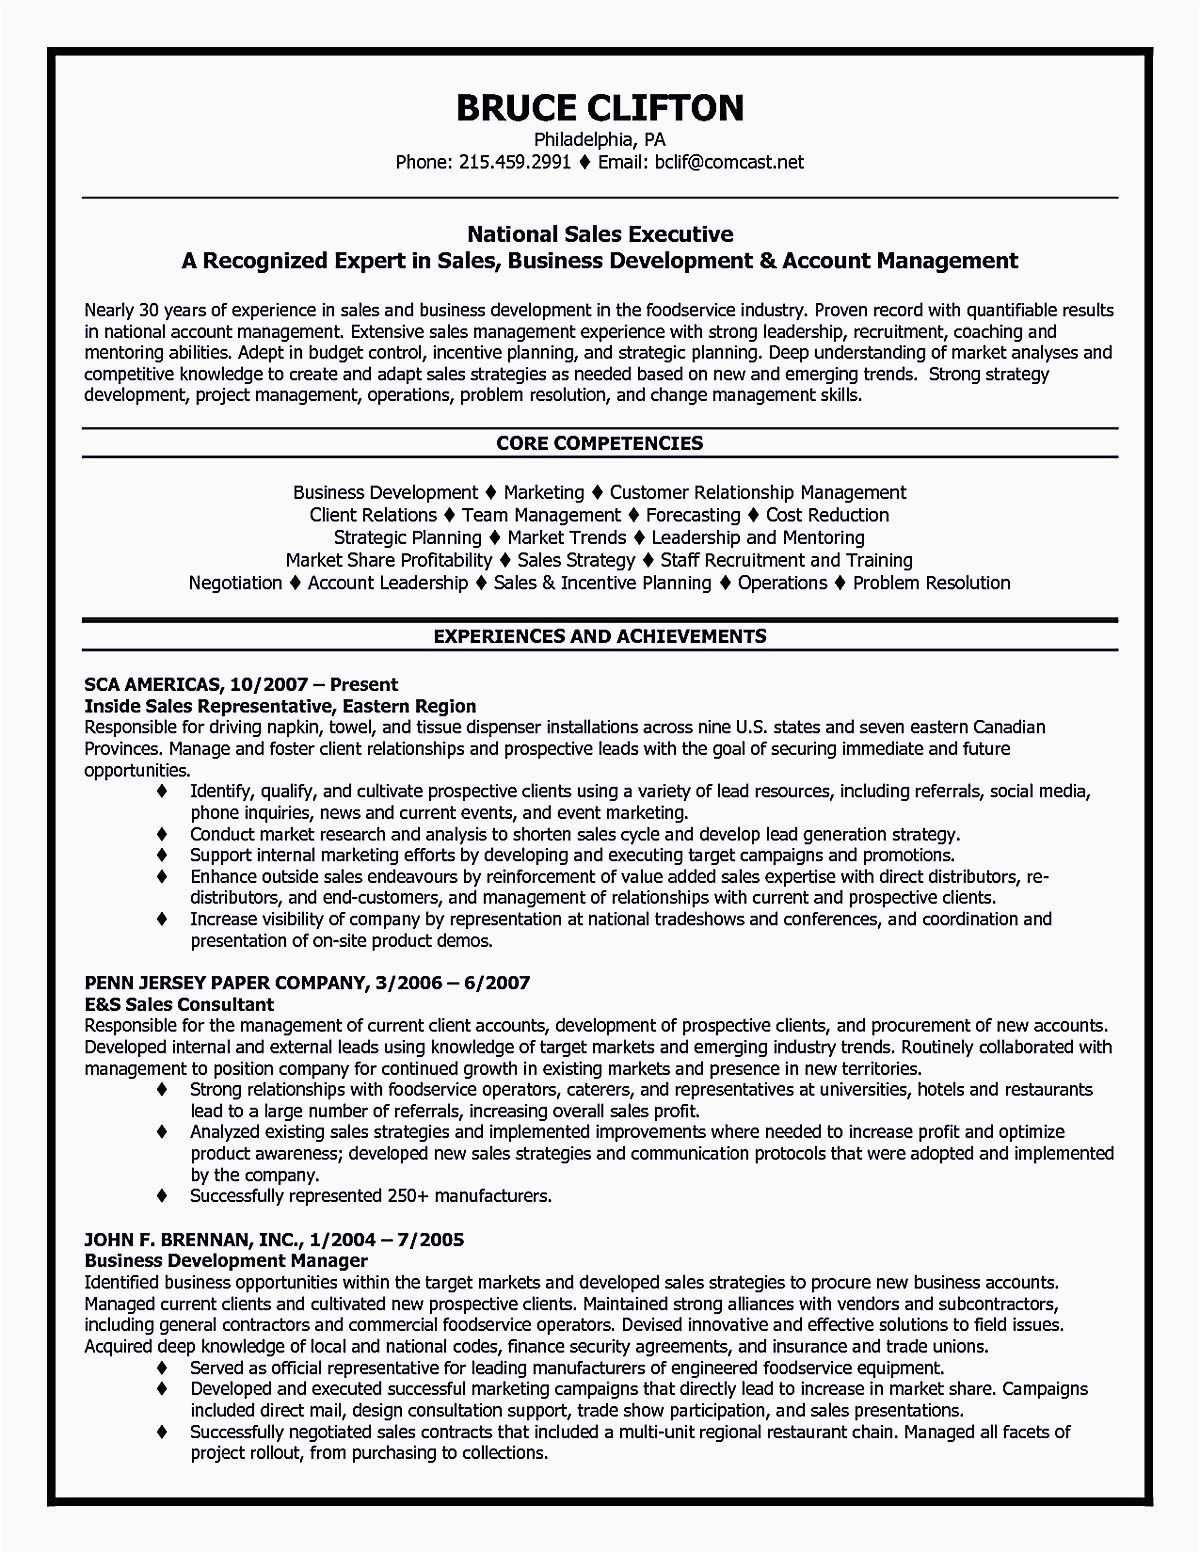 Sample Resume for Account Executive Position Account Executive Resume is Like Your Weapon to the